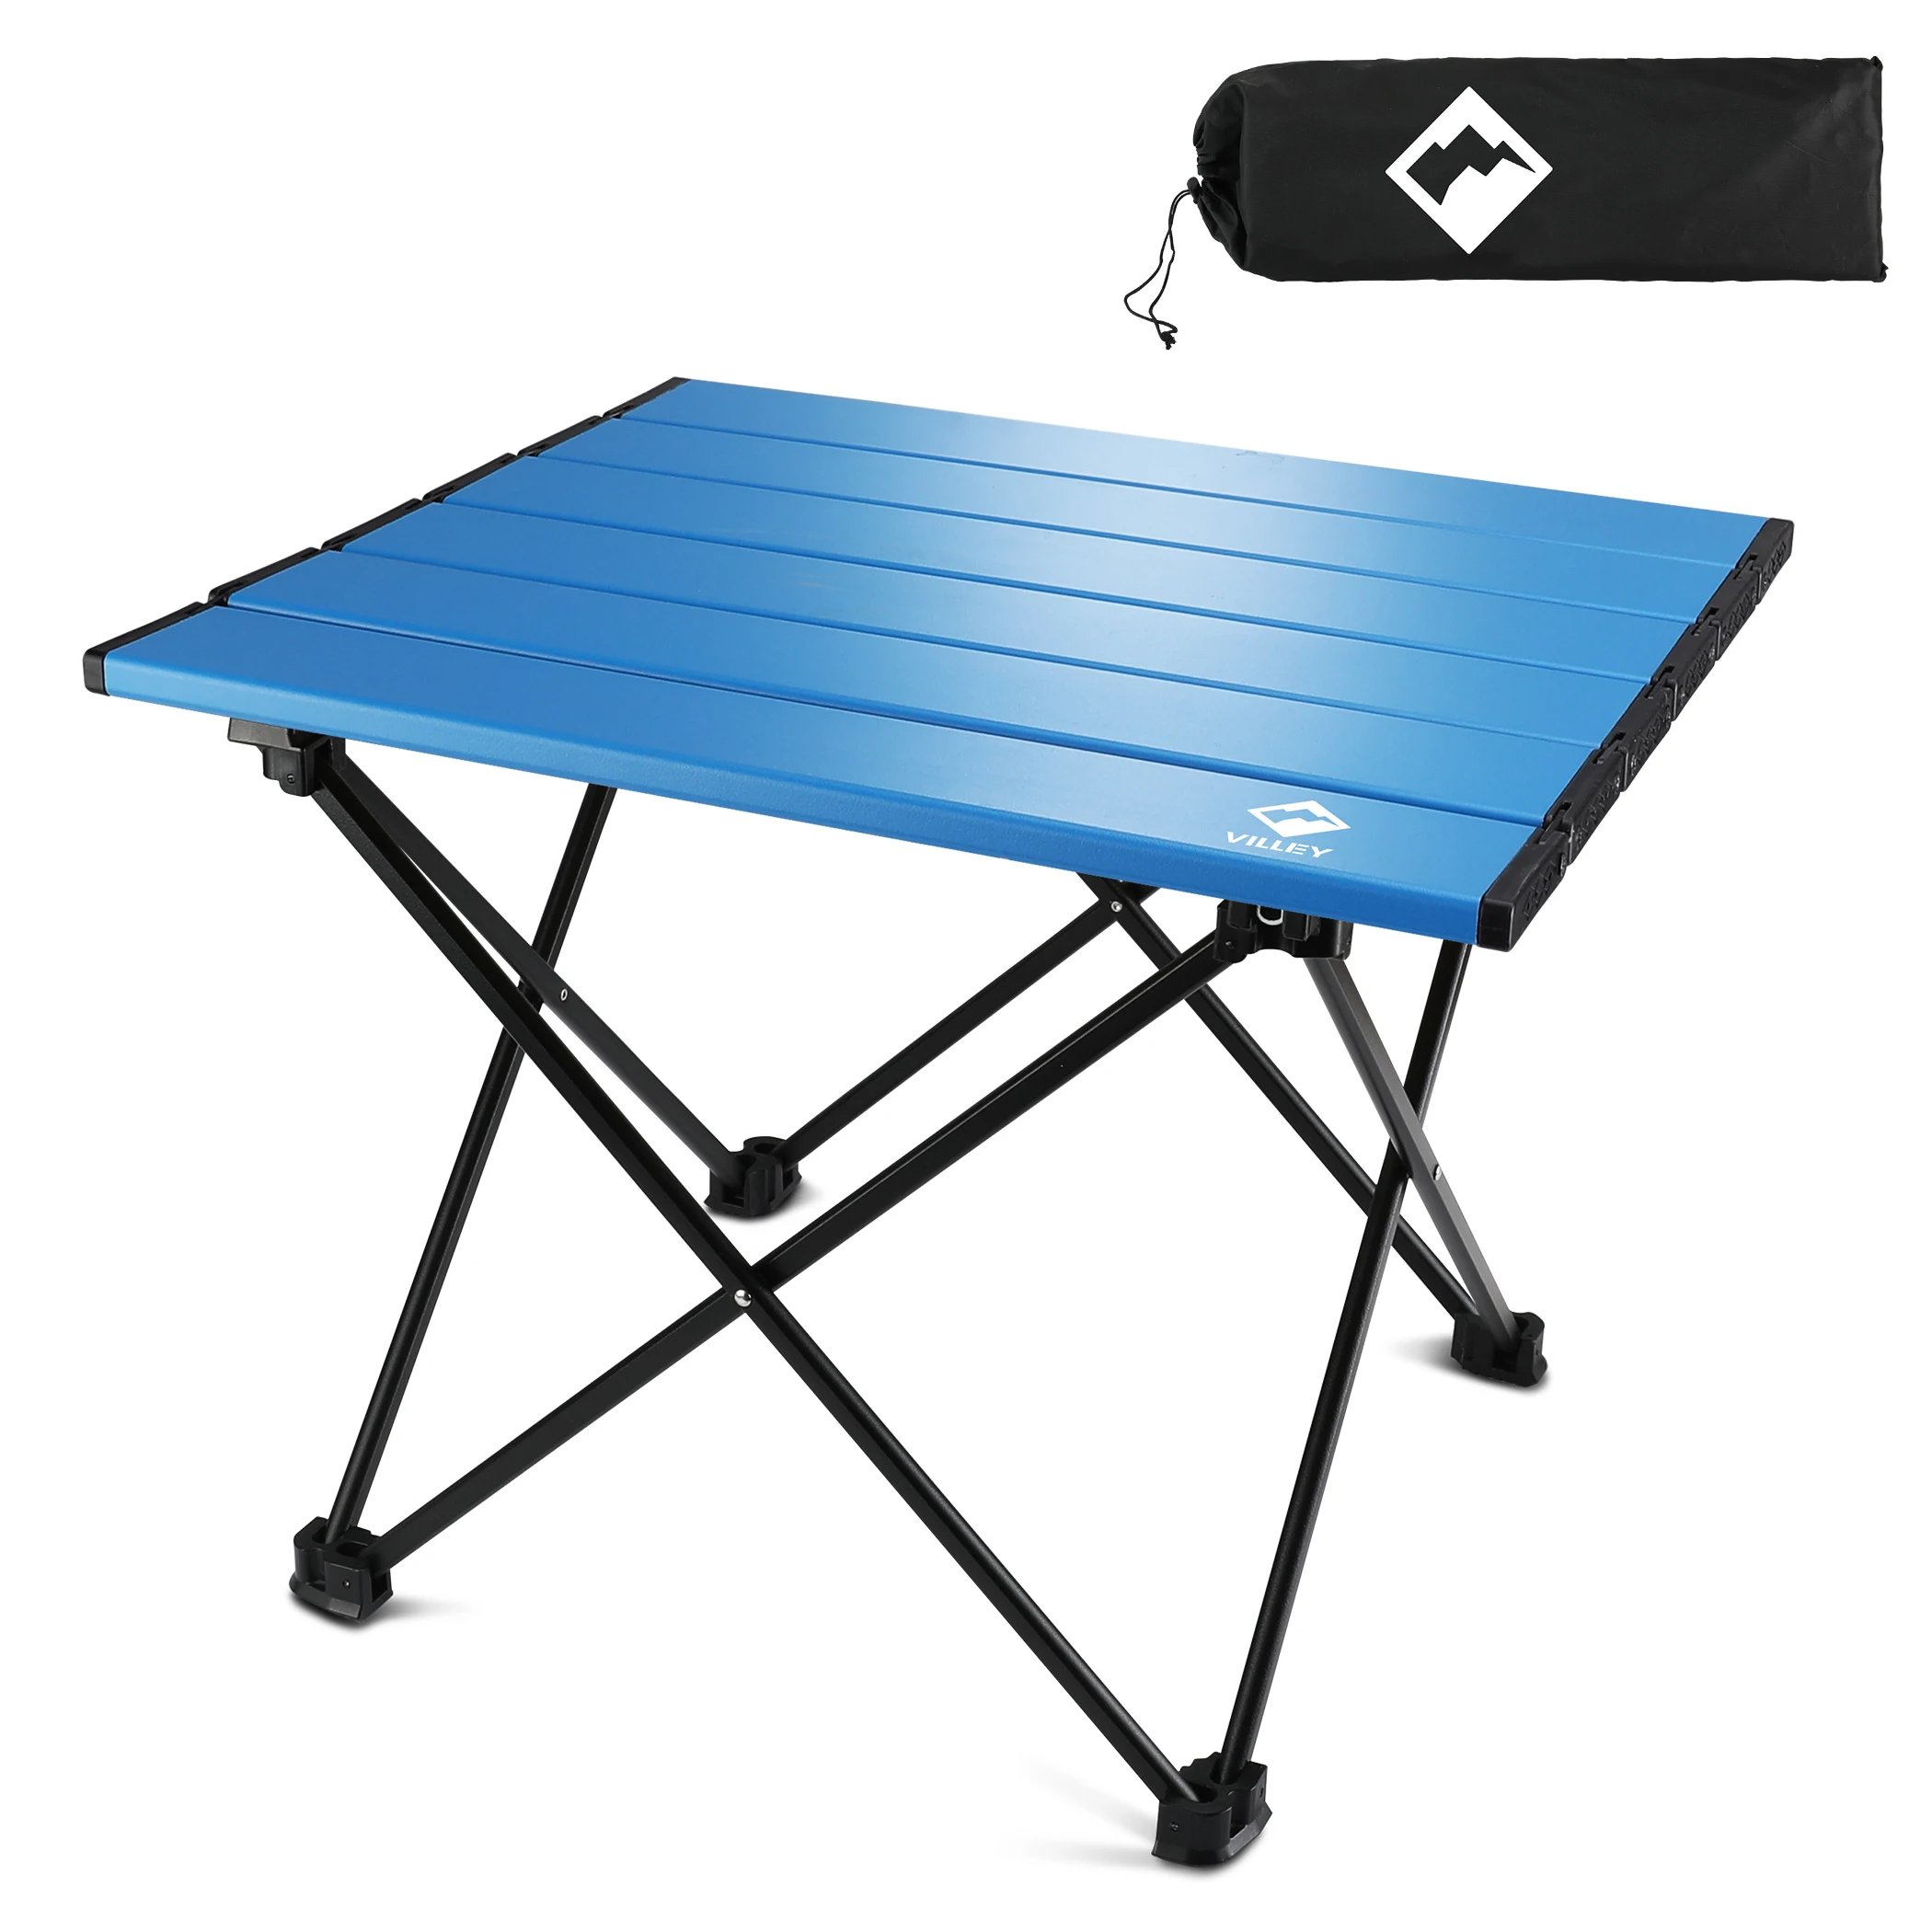 outdoor-camping-aluminum-alloy-folding-table-picnic-camping-desk-portable-multifunctiona-hiking-outdoor-bbq-folding-table